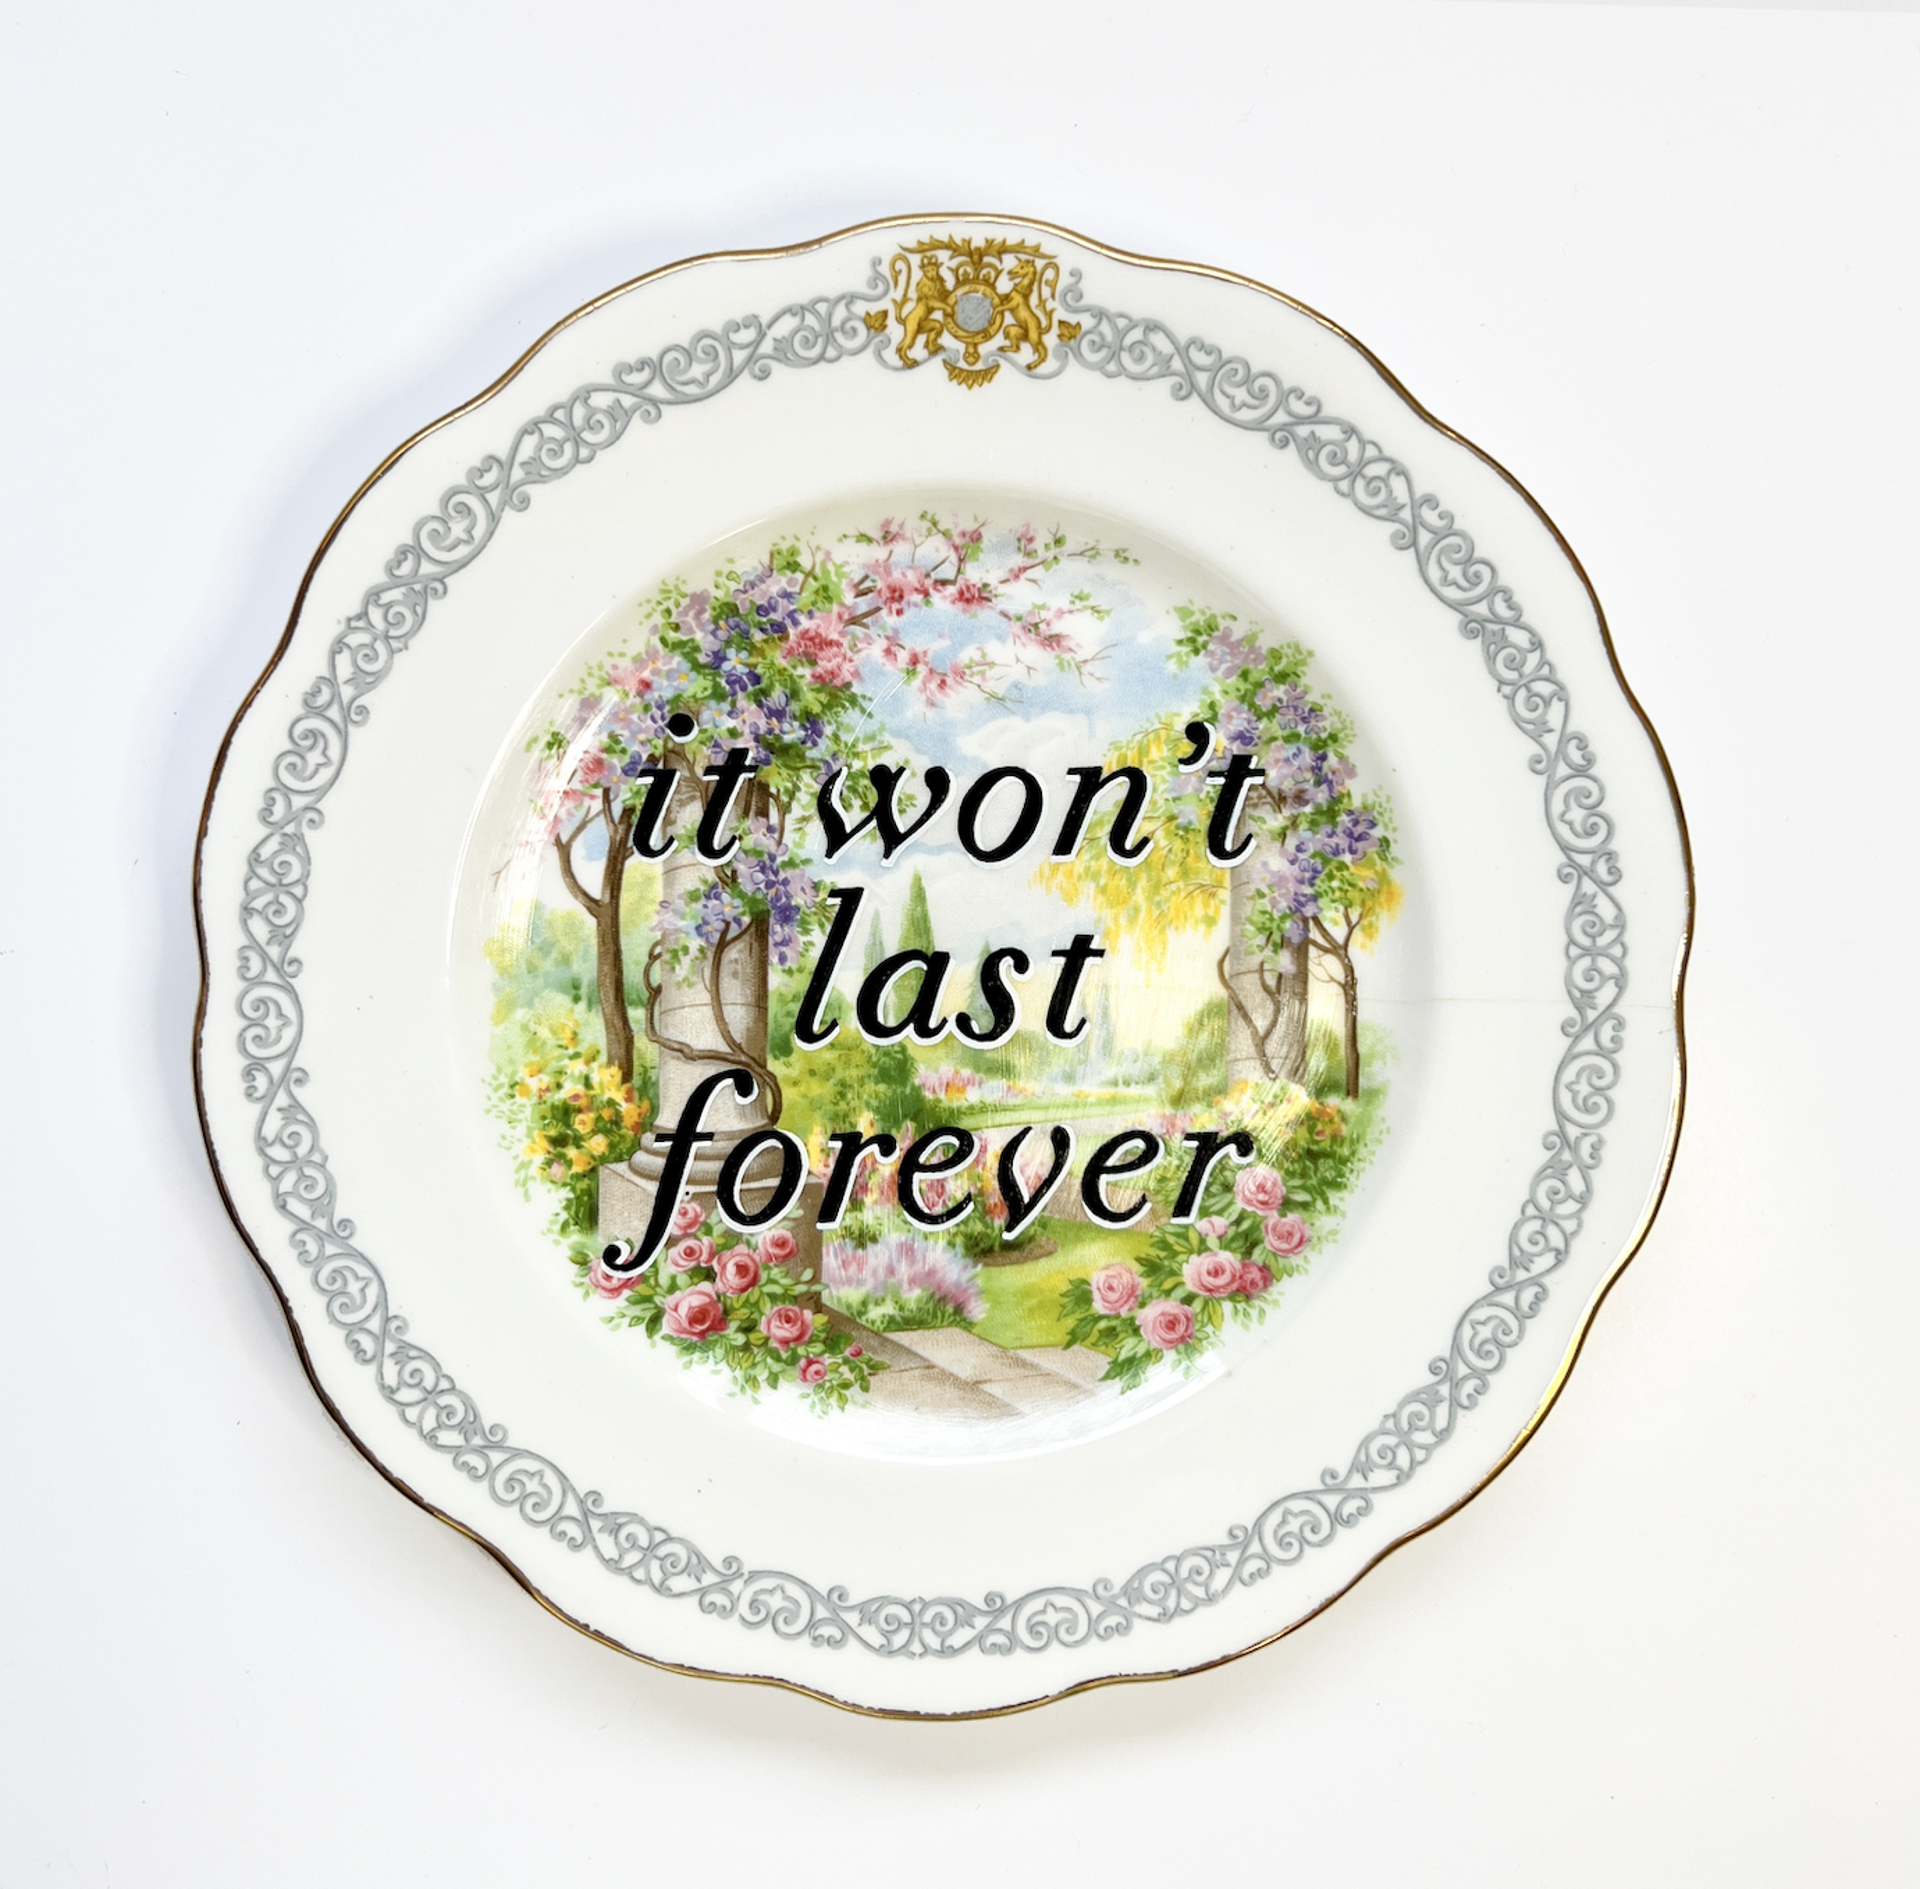 It won't last forever (small dinner plate) by Marie-Claude Marquis